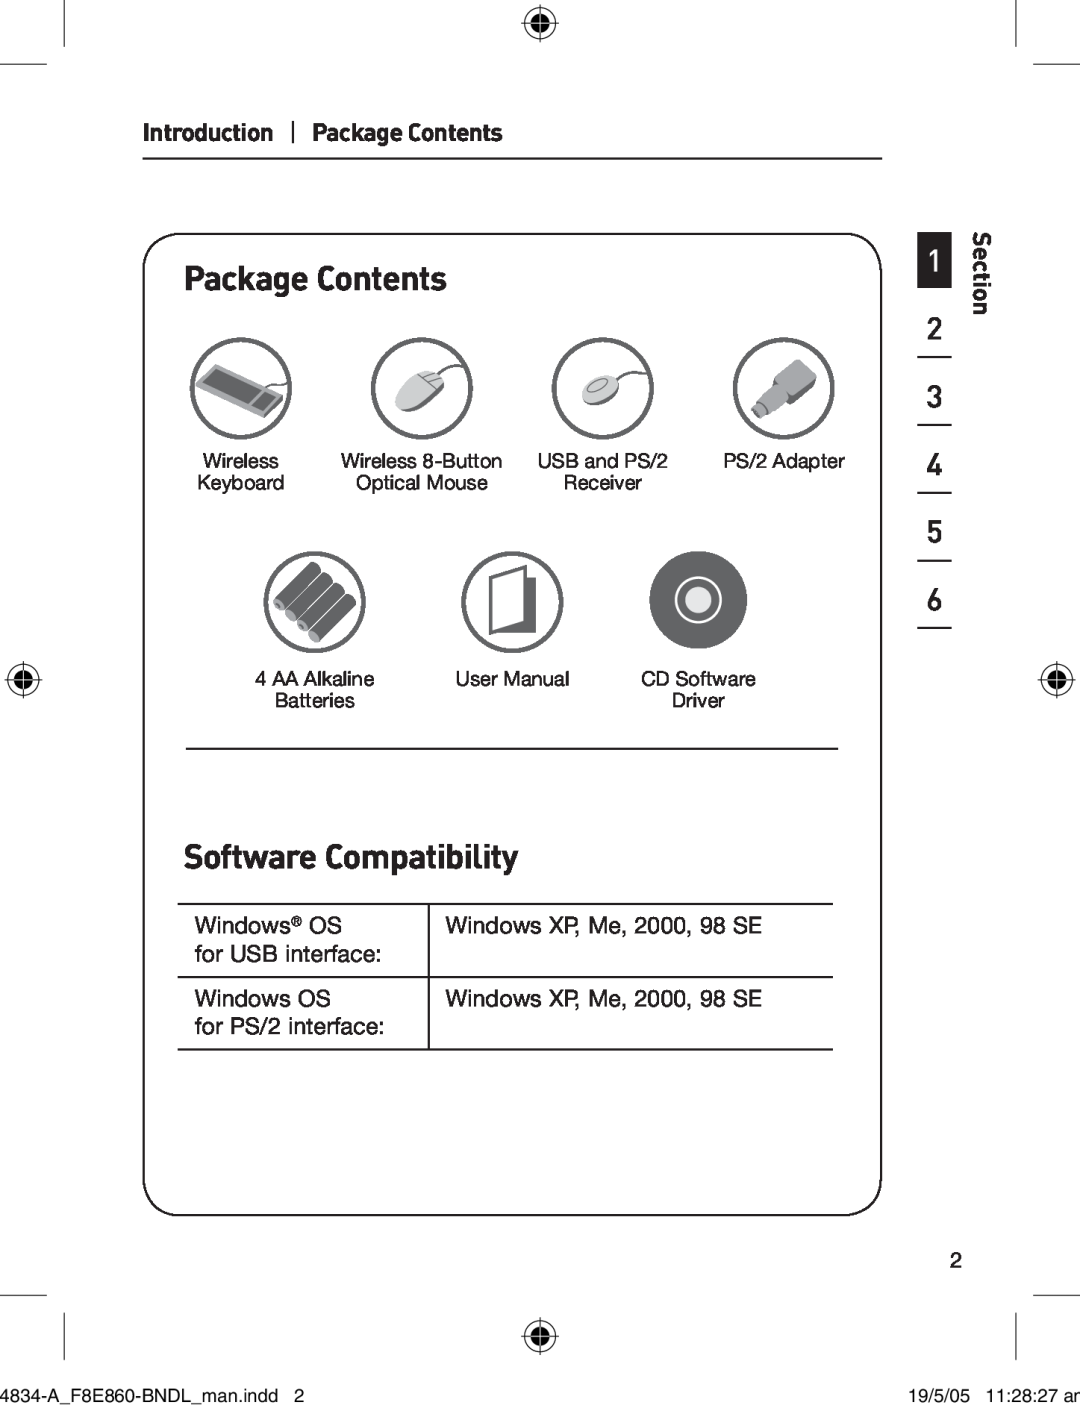 Belkin 280 manual Software Compatibility, Introduction Package Contents, Windows OS, Windows XP, Me, 2000, 98 SE 